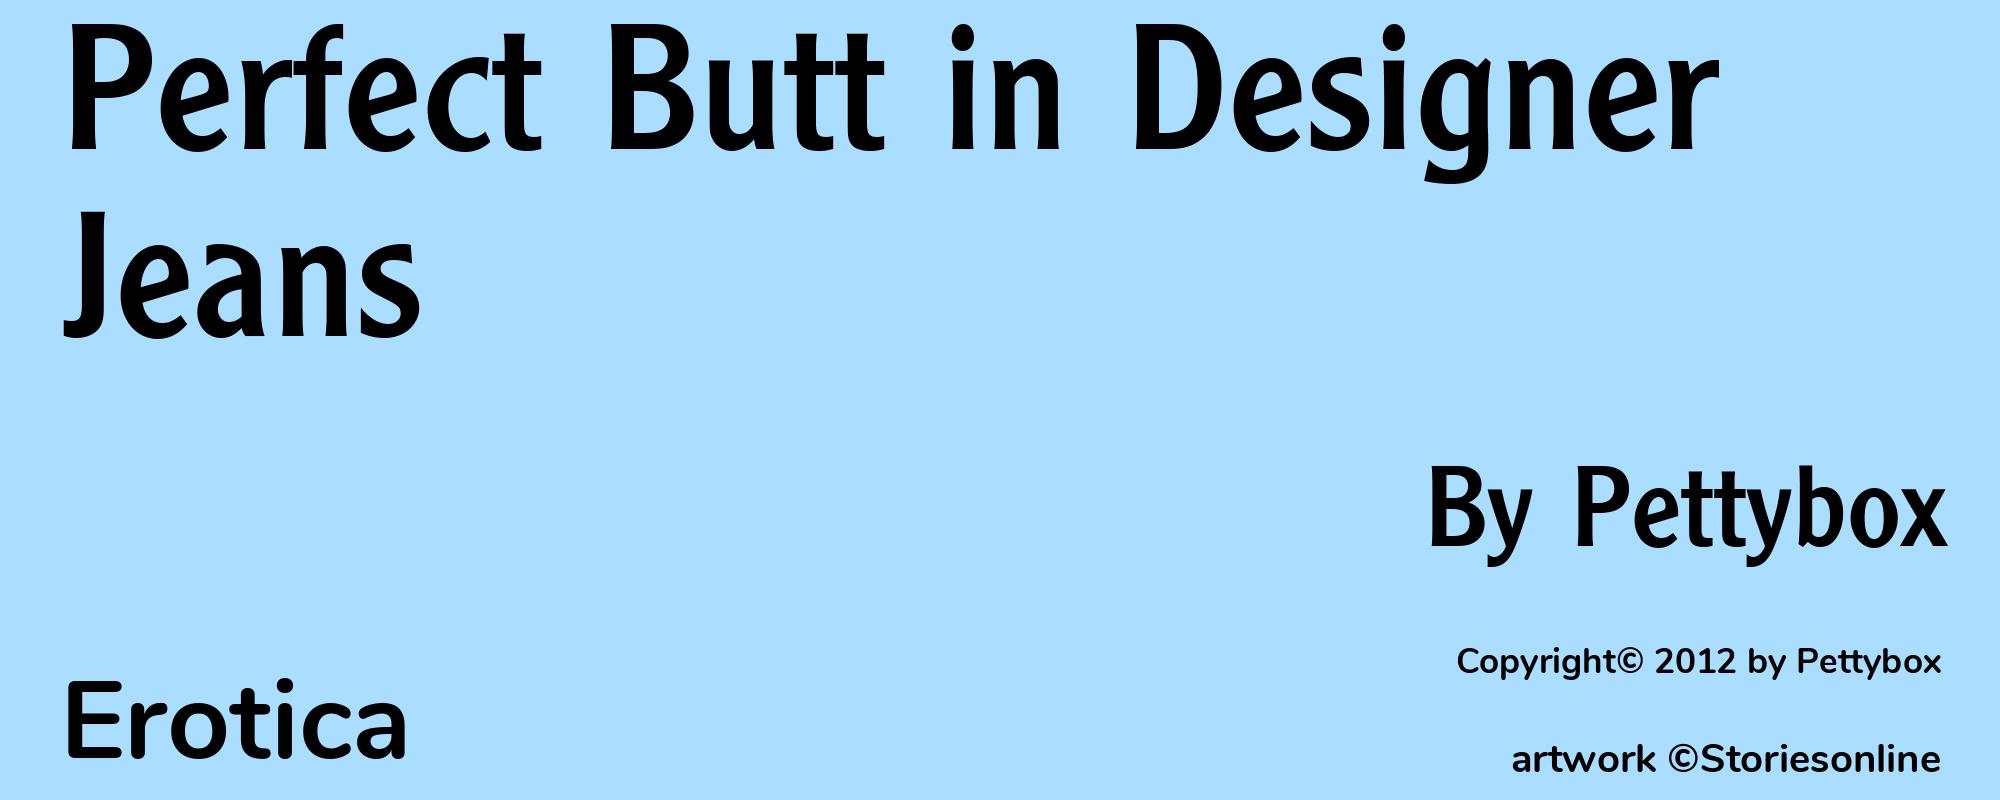 Perfect Butt in Designer Jeans - Cover